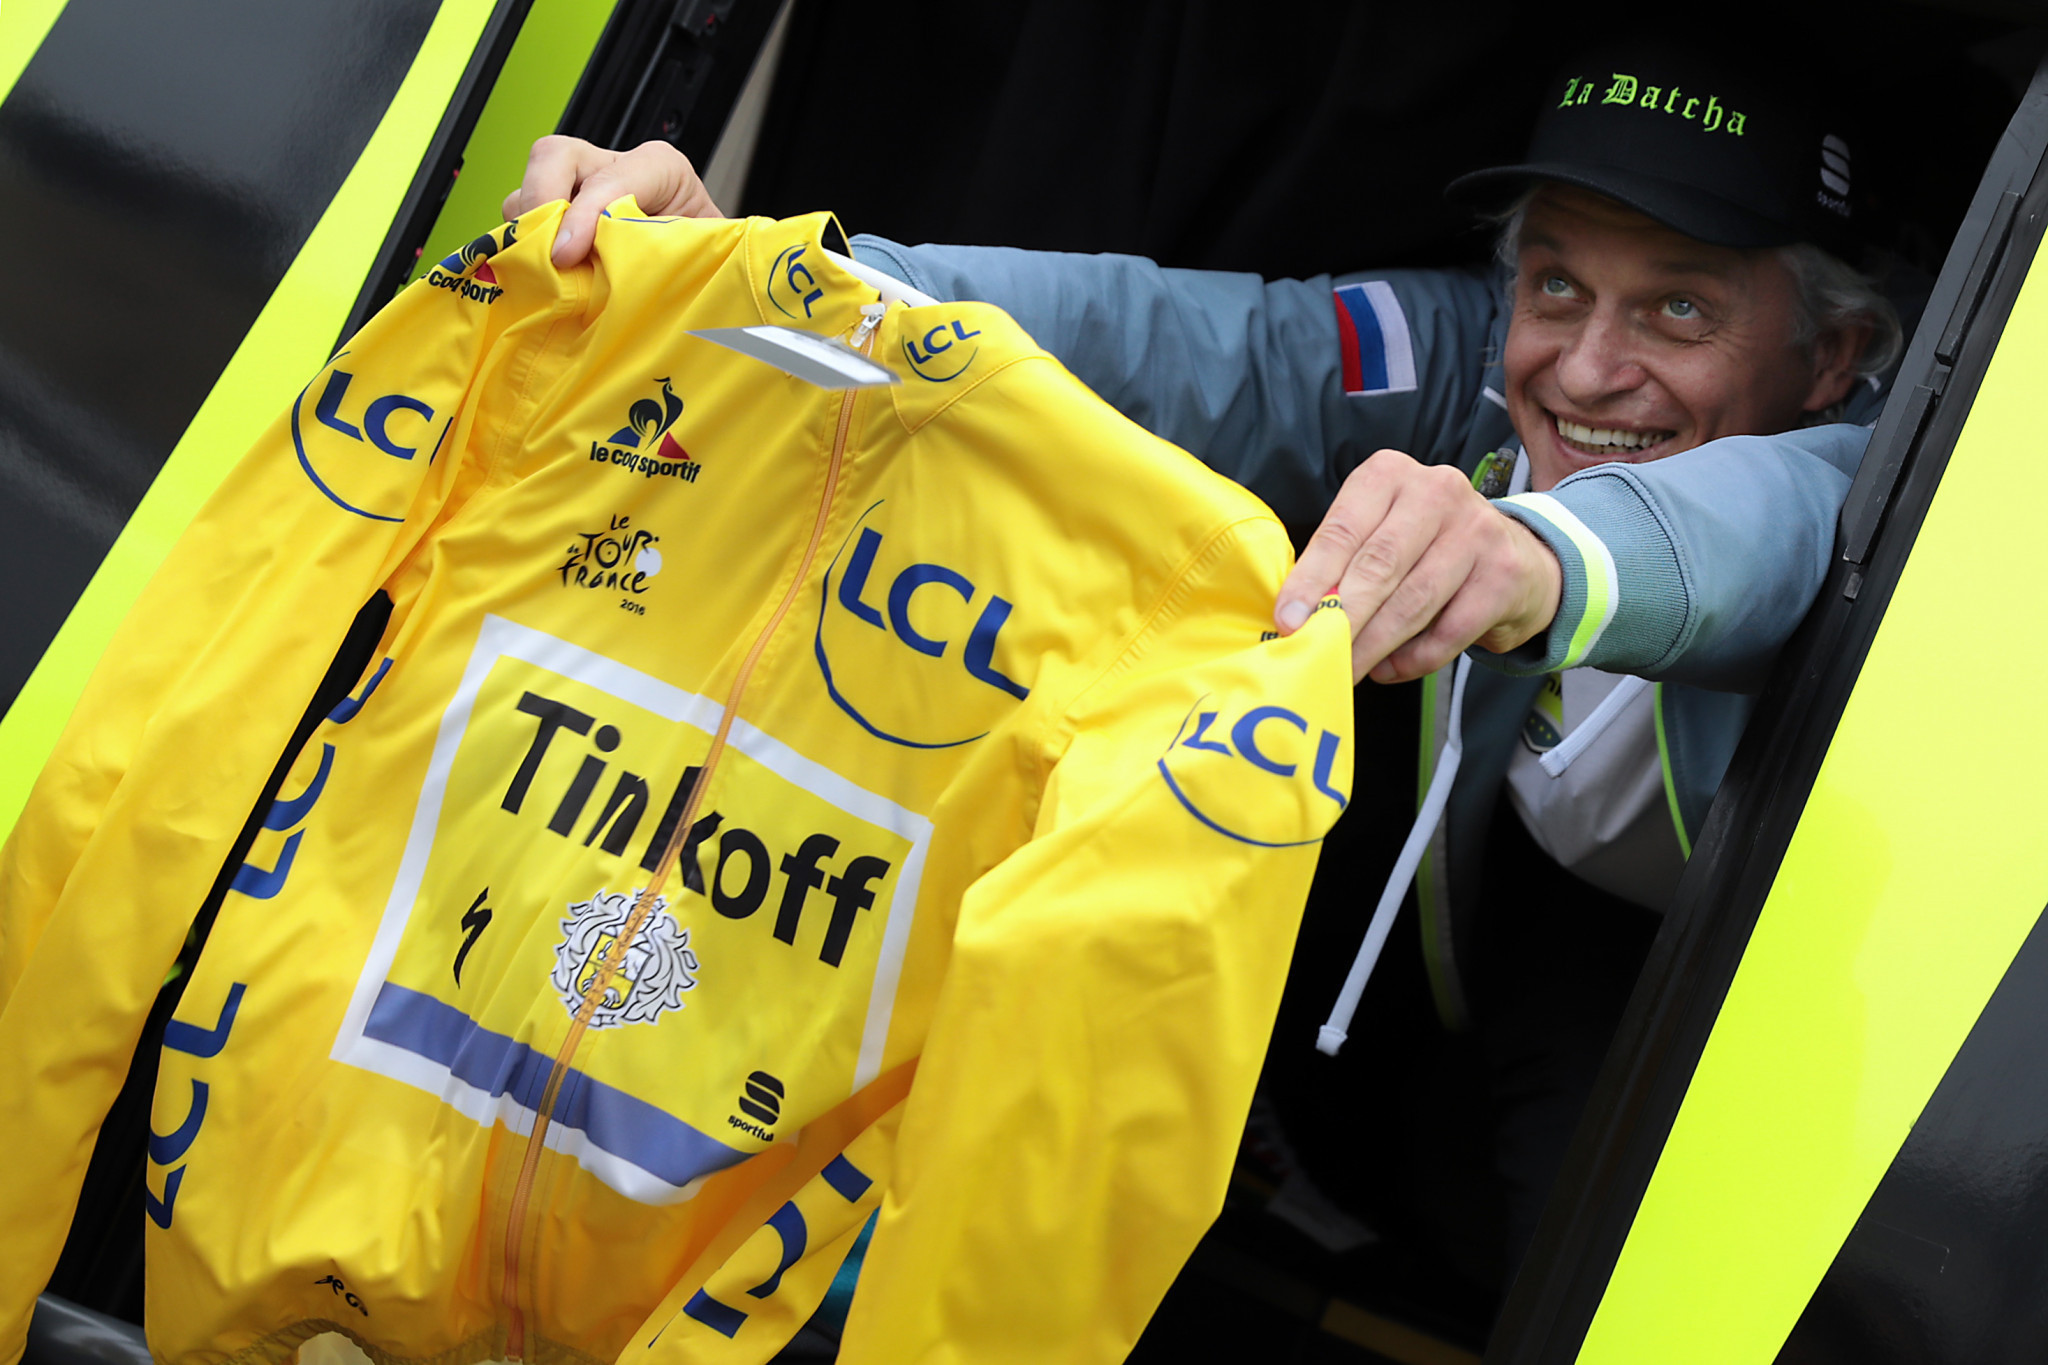 Oleg Tinkov owned a UCI WorldTour team in the 2010s ©Getty Images